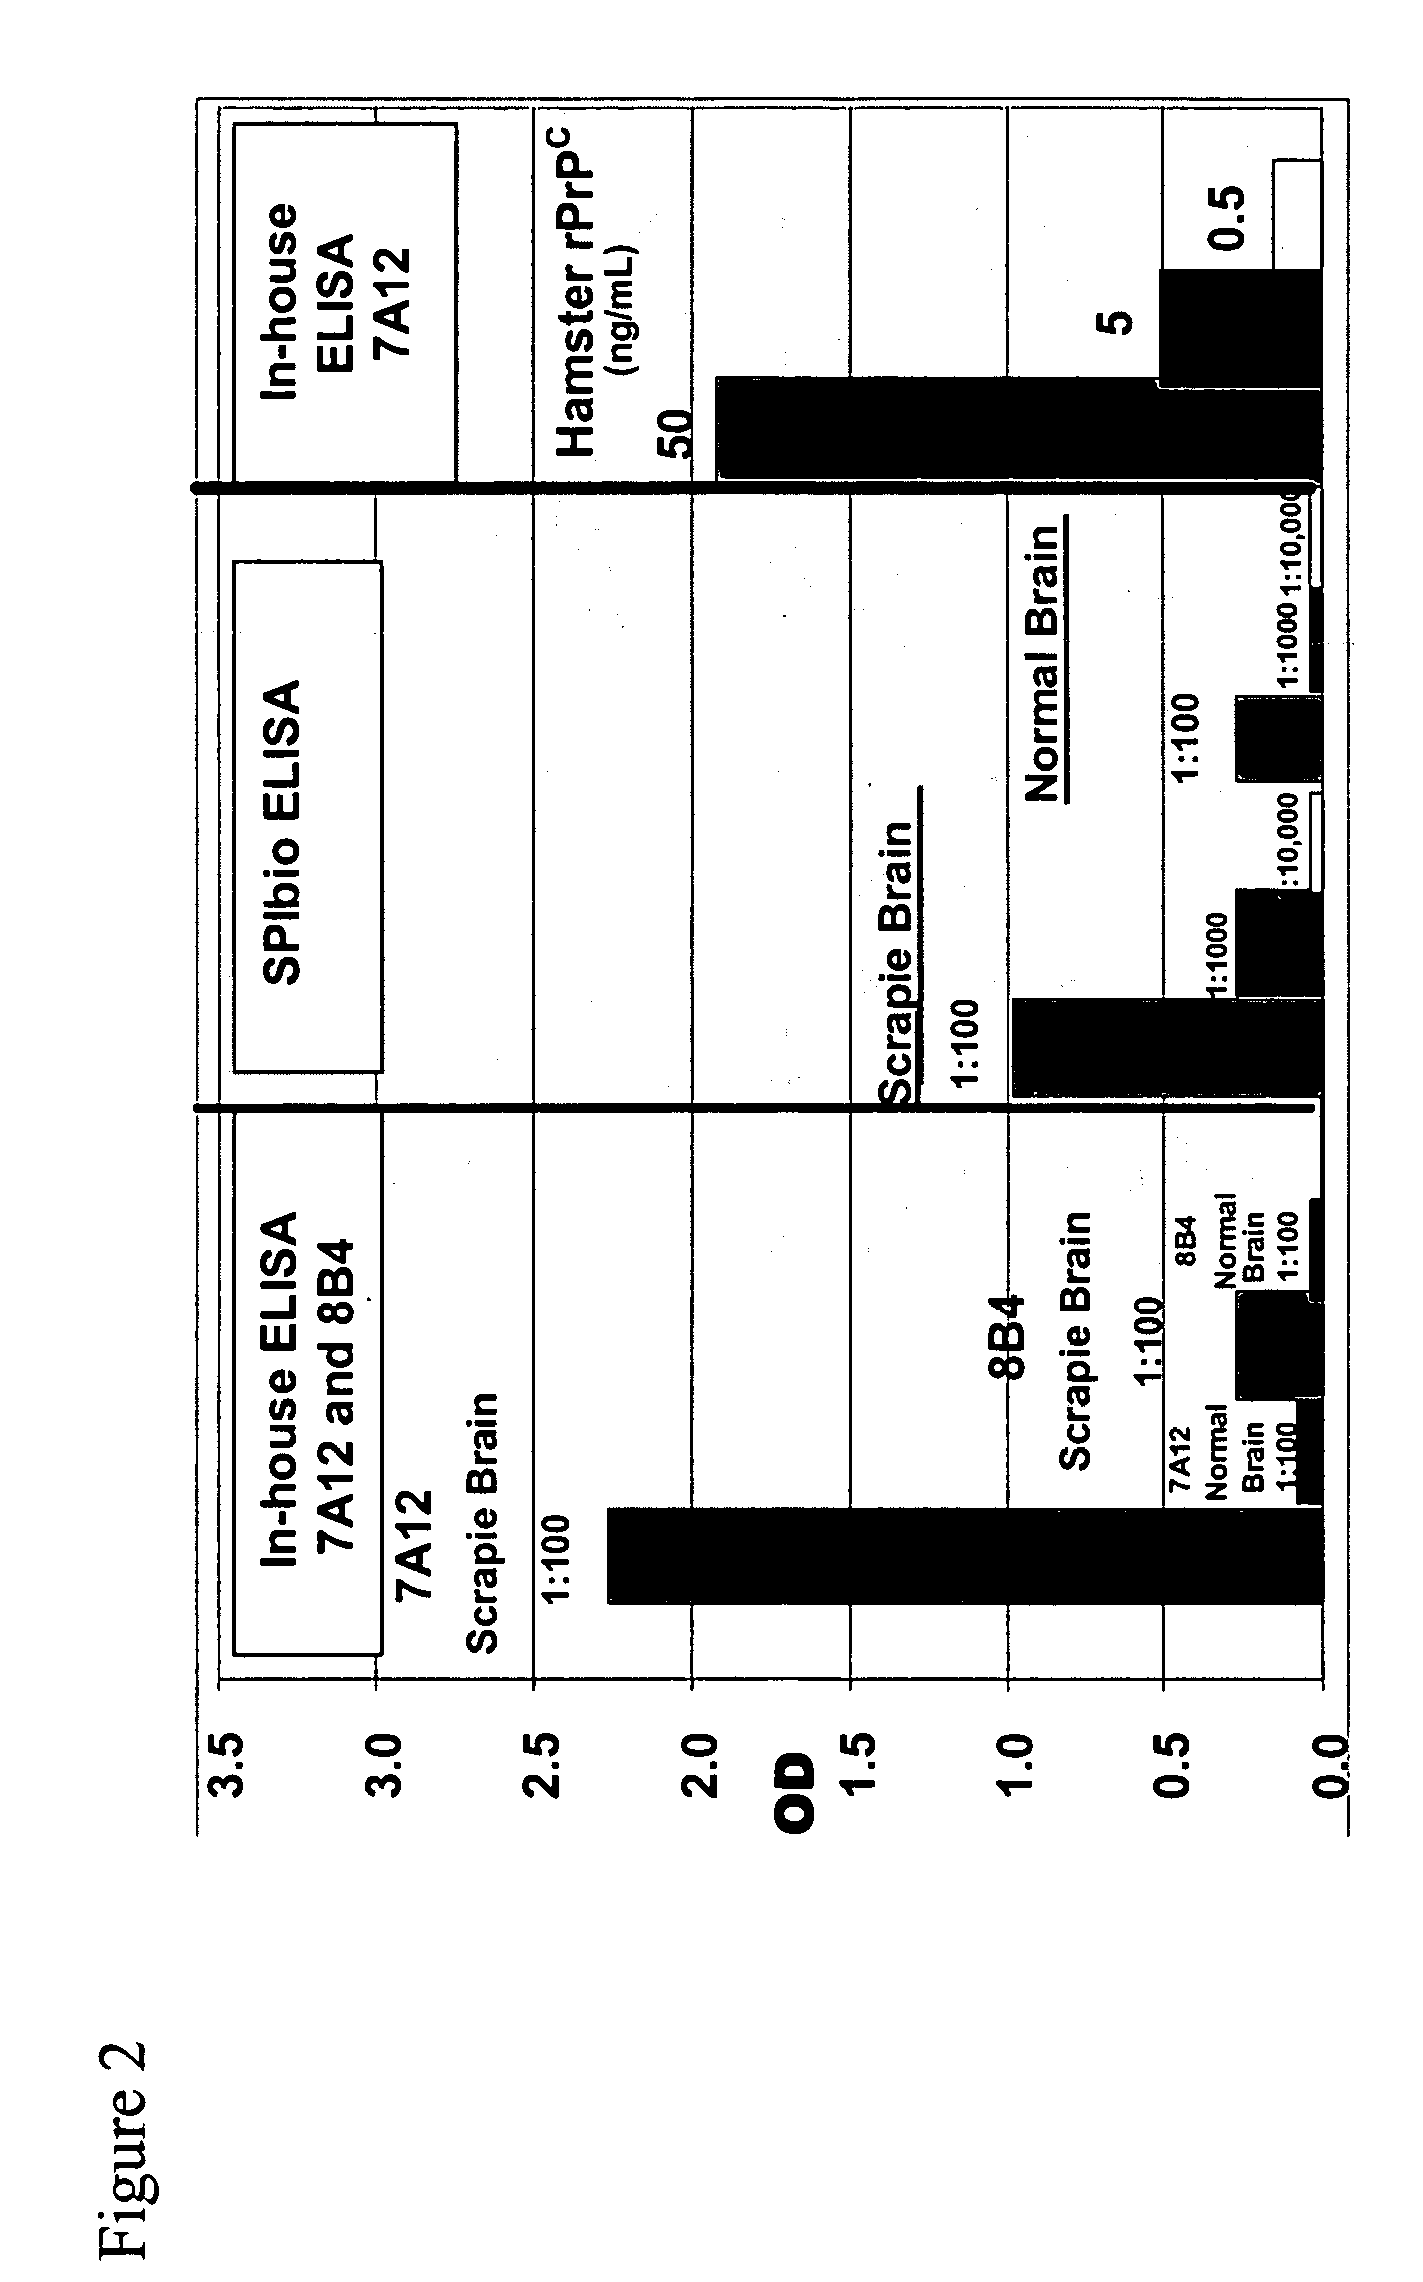 Immuno-PCR method for the detection of a biomolecule in a test sample